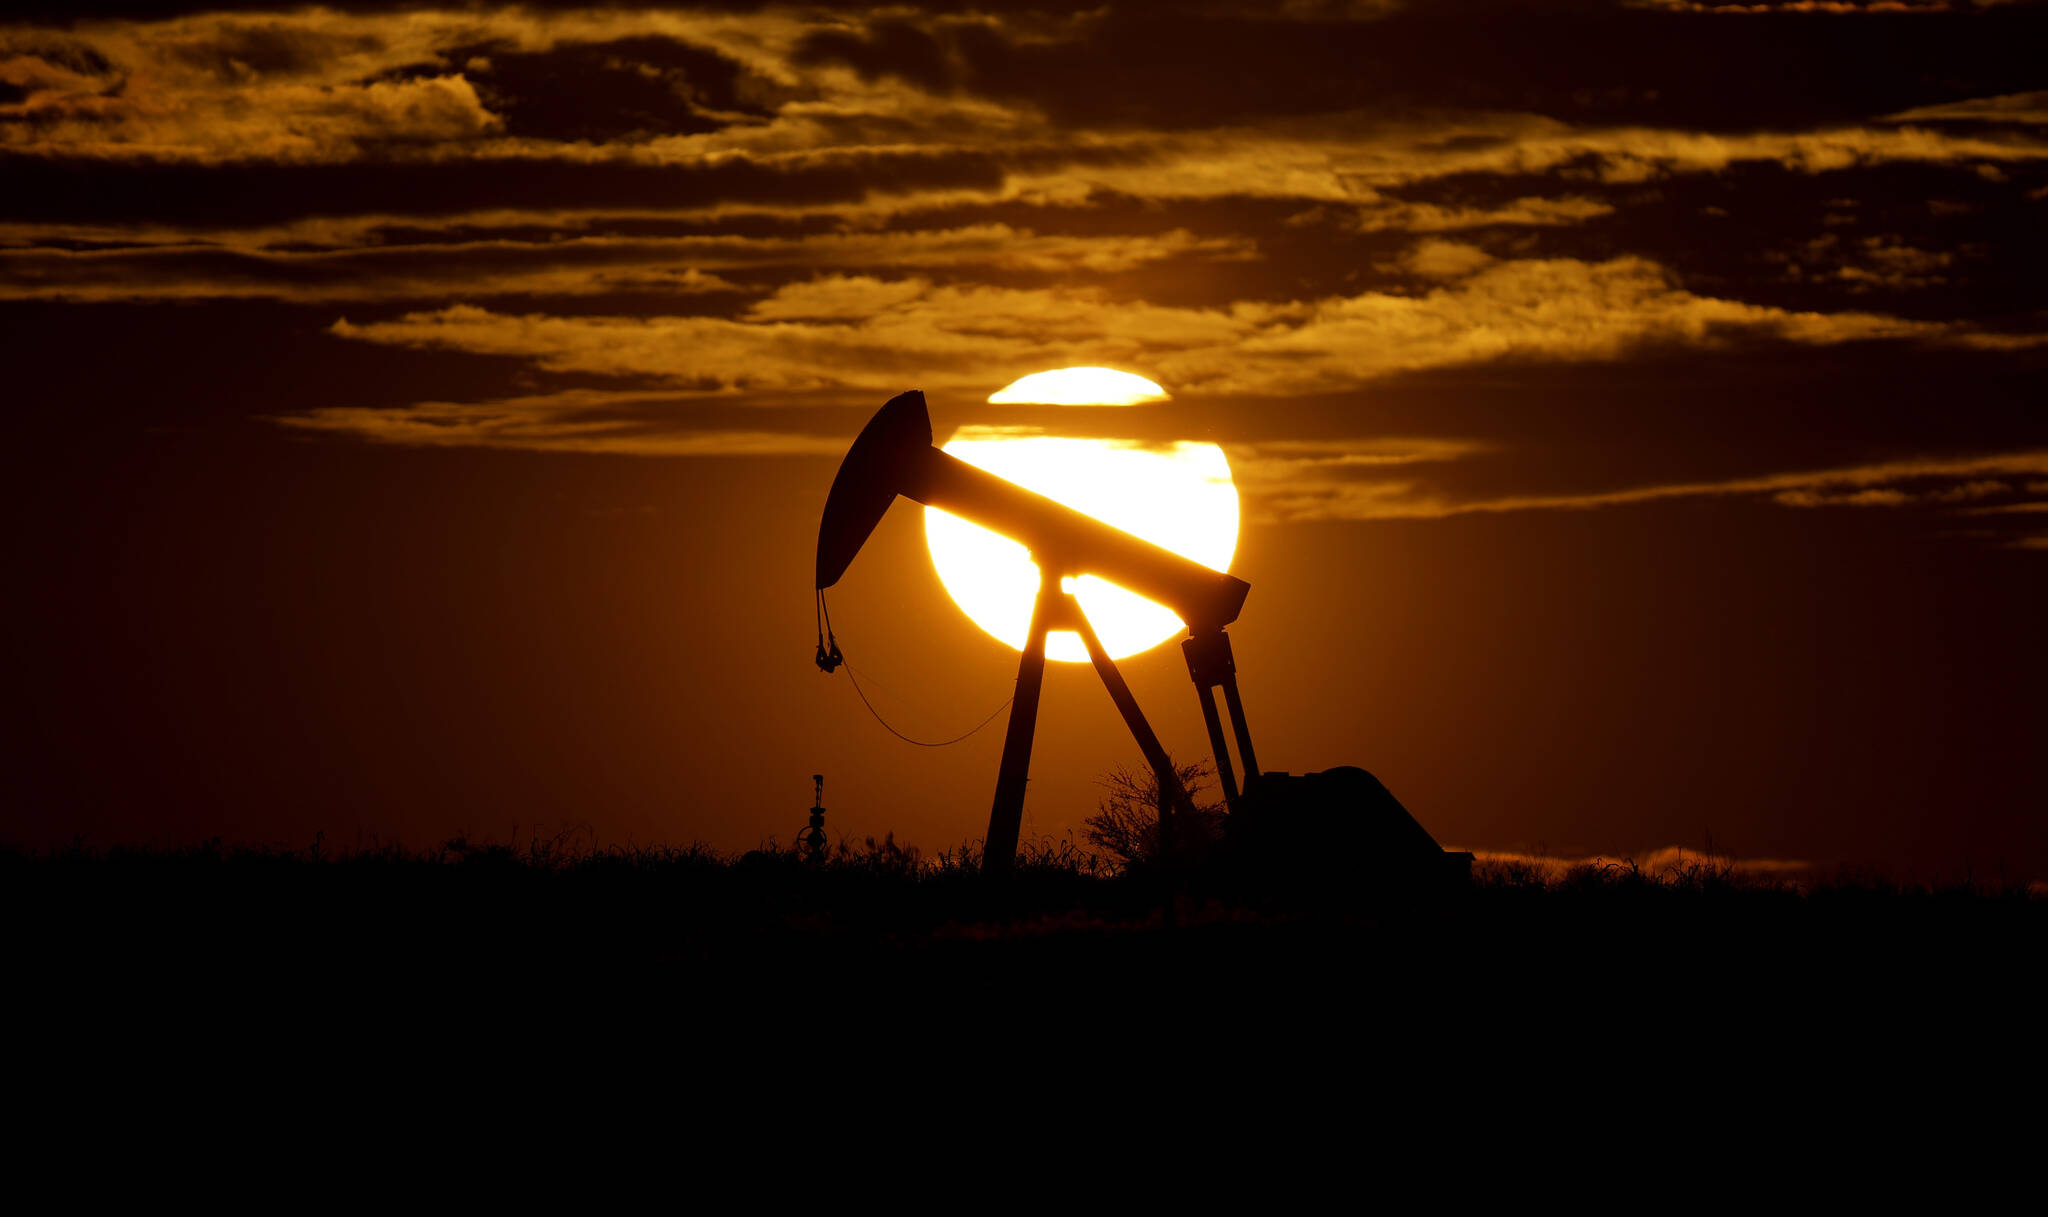 The sun sets behind an idle pump jack near Karnes City, USA, April 8, 2020. Oil prices are sagging amid fears of recessions across the globe. OPEC and allied countries are weighing what to do about that when they meet online Thursday, Sept. 8, 2022. High oil prices were a bonanza for countries like Saudi Arabia over the summer, but now they’re well off those highs. Saudi Arabia’s oil minister has even said the group known as OPEC+ could cut production at any time. (AP Photo / Eric Gay)